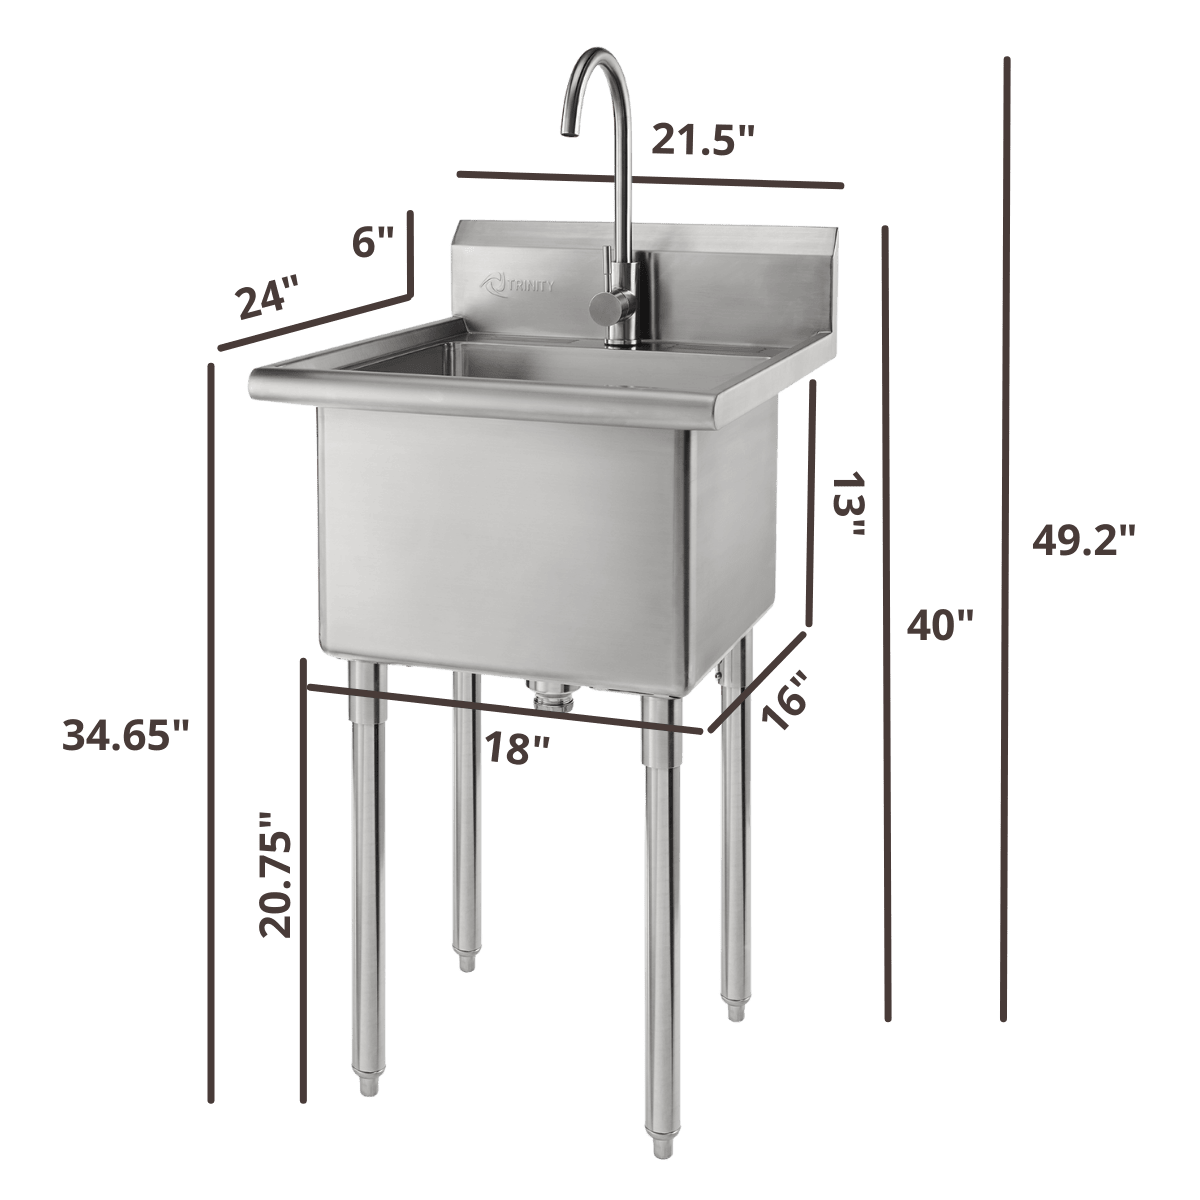 dimensions of the stainless steel sink